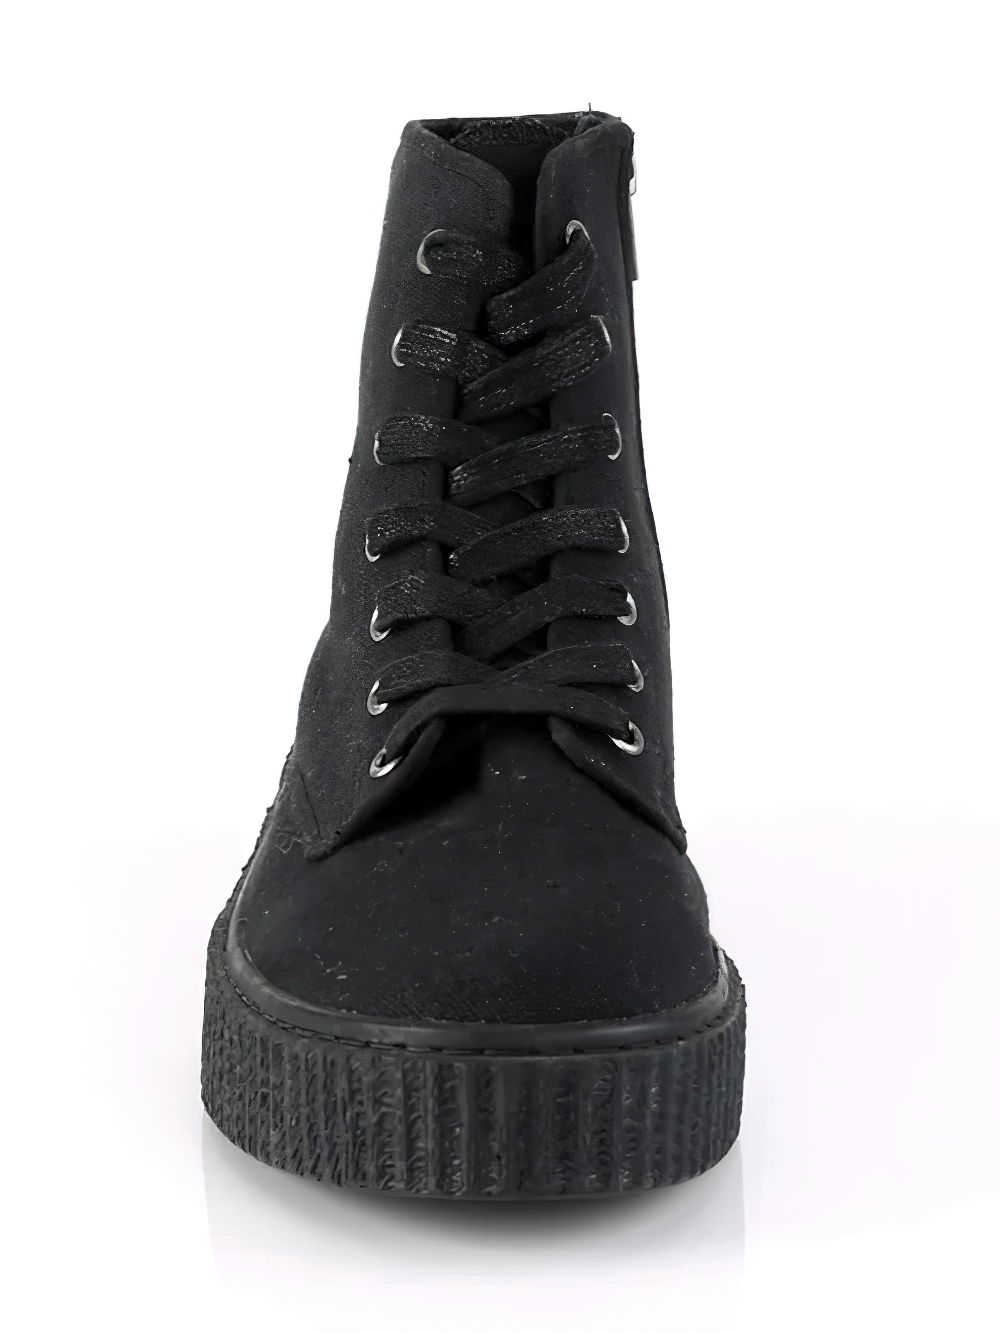 DEMONIA Canvas High-Top Platform Sneakers for Men and Women